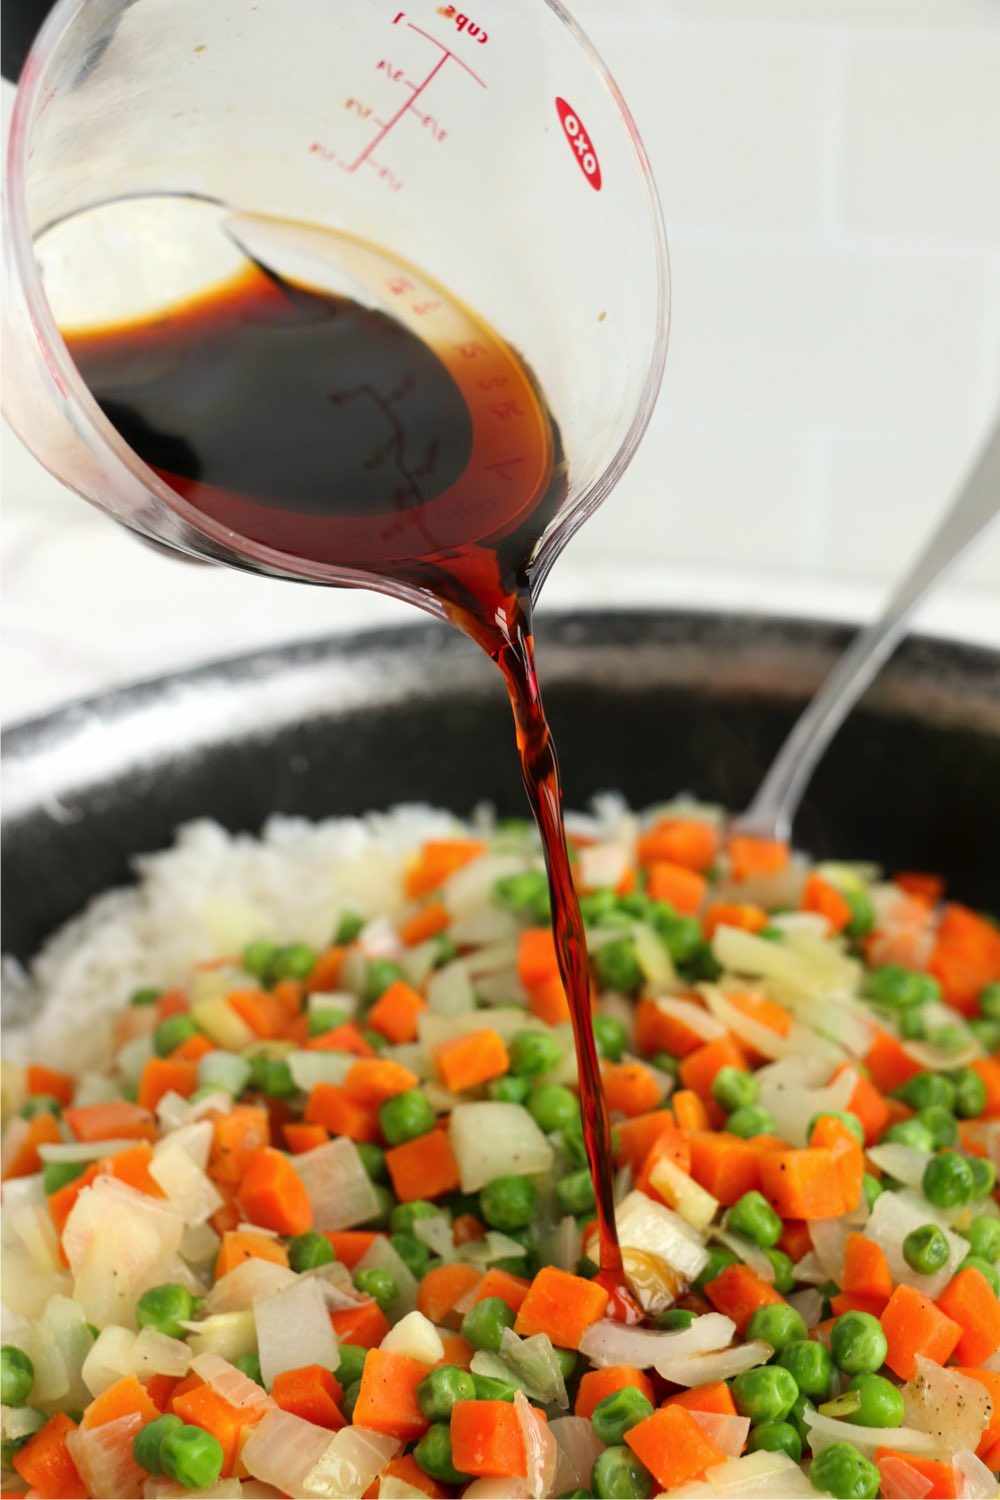 Adding soy sauce to fried rice